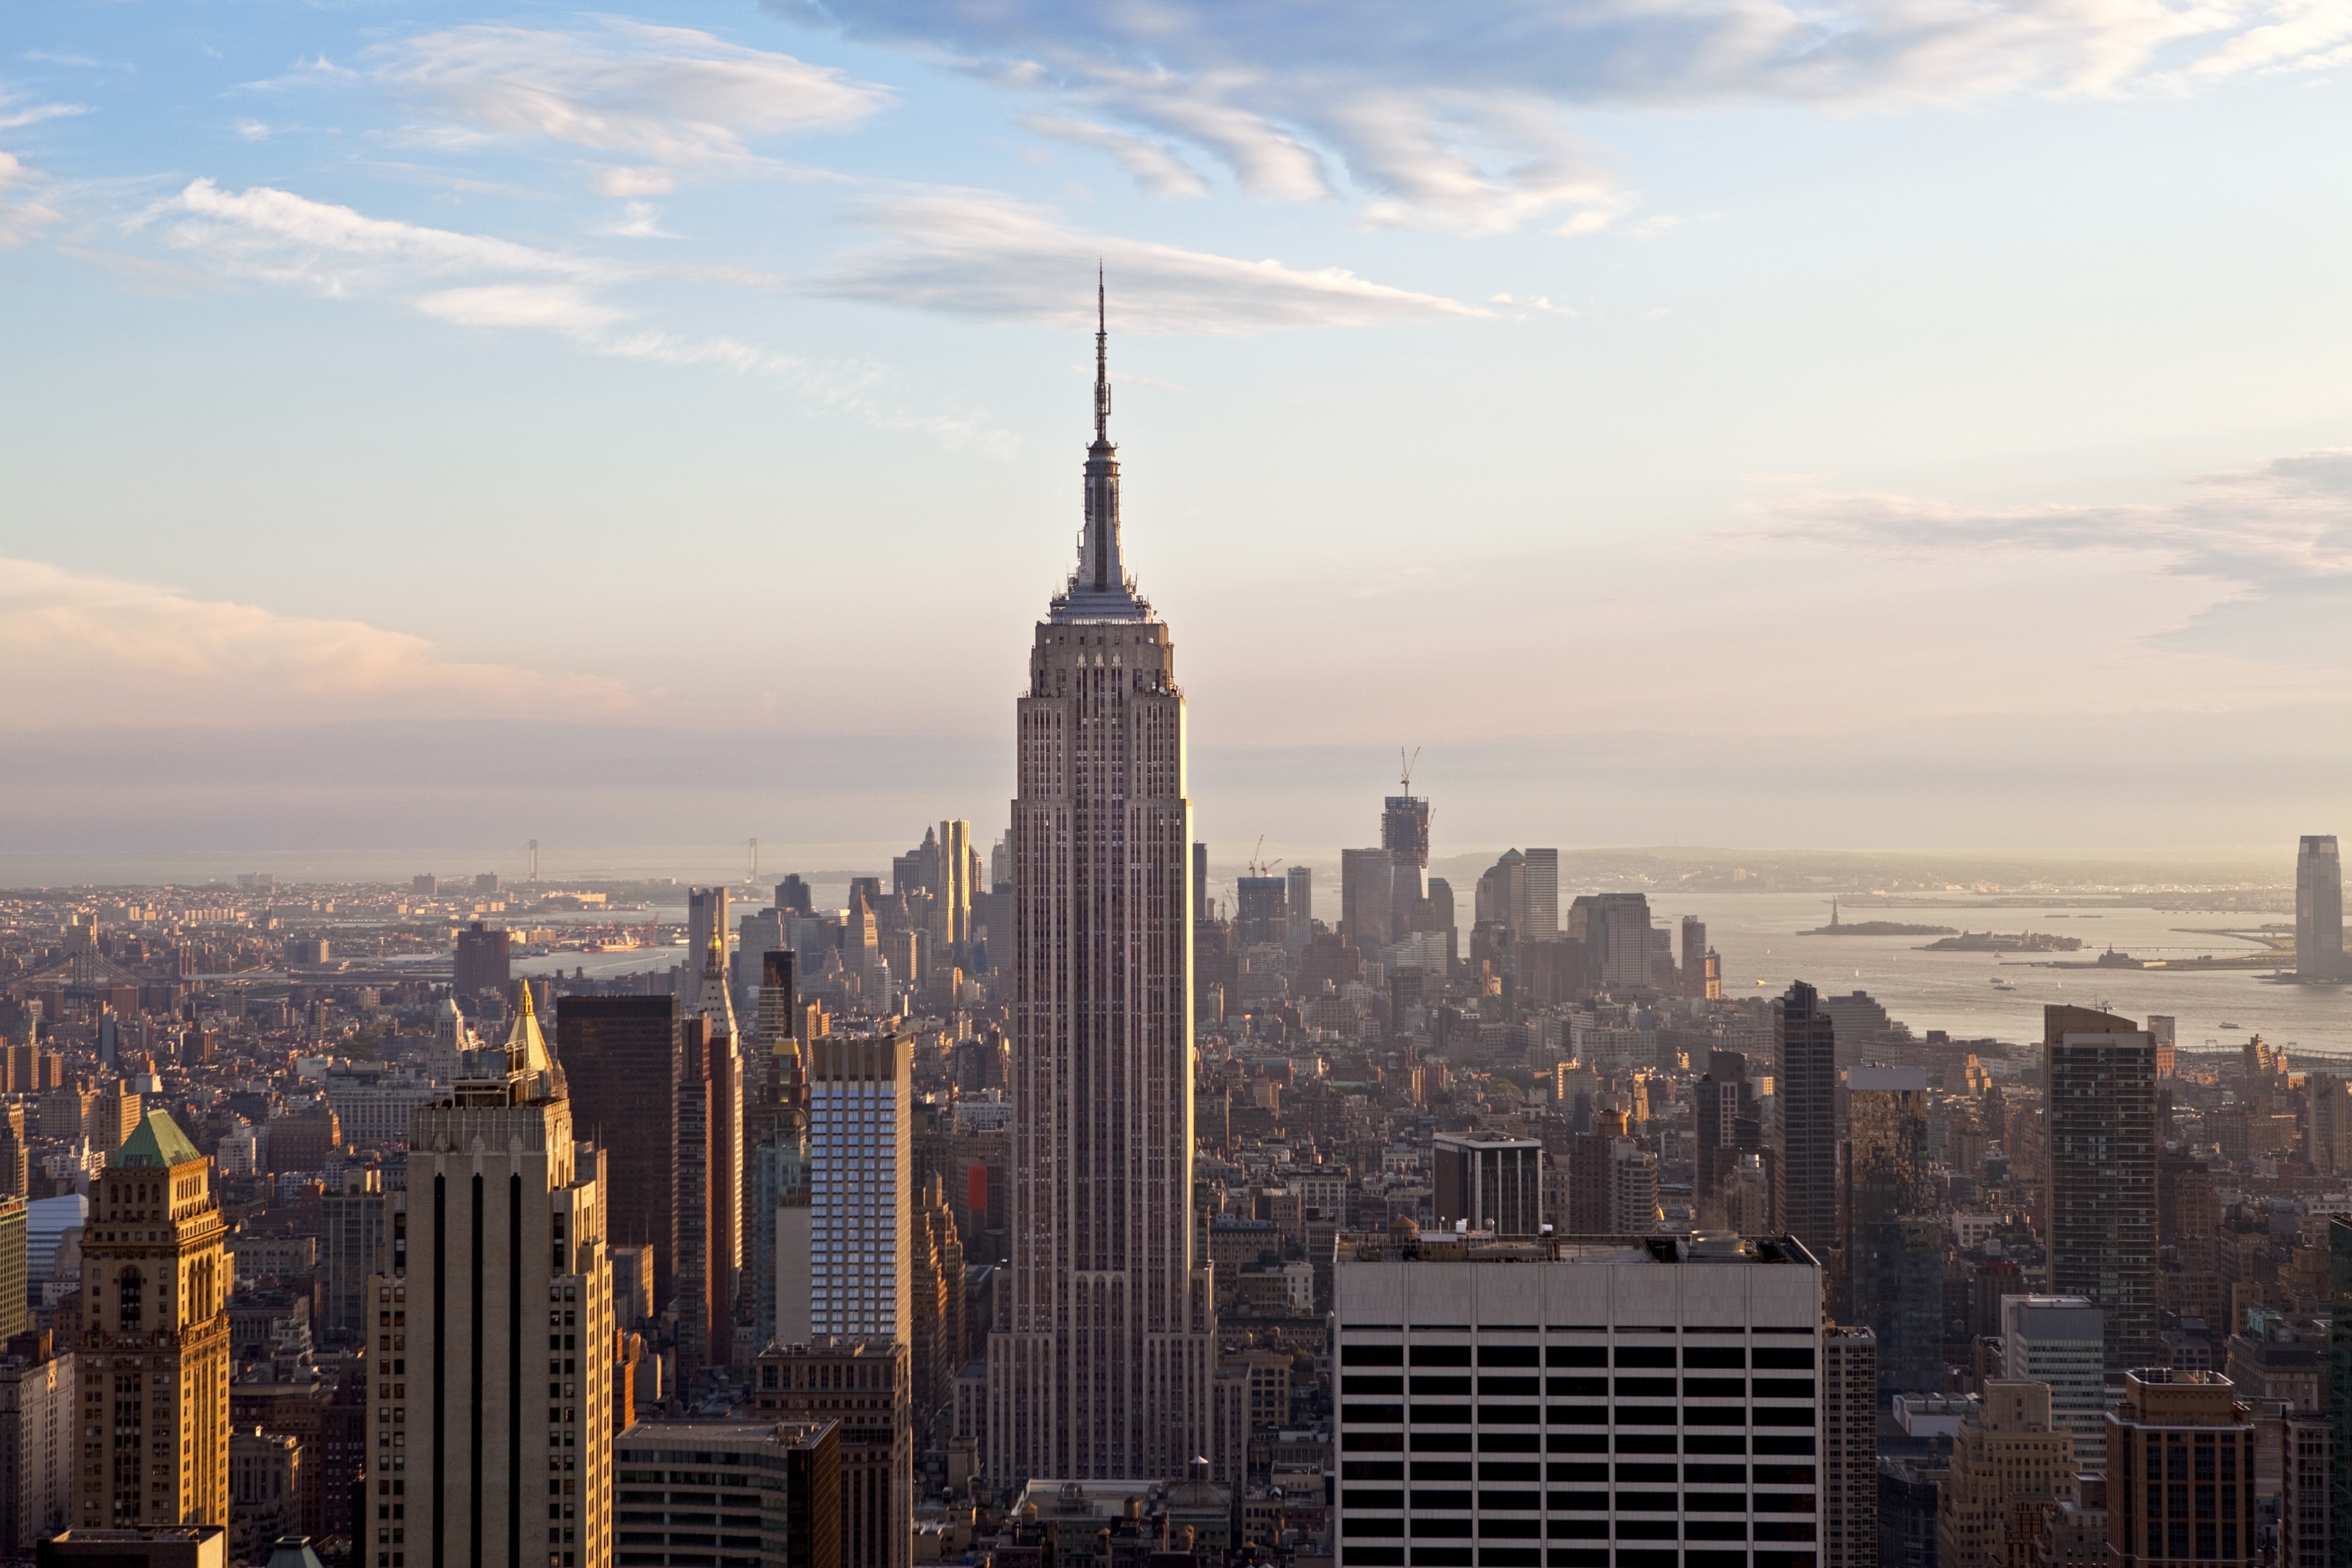 Empire State Building, New York, New York, United States of America